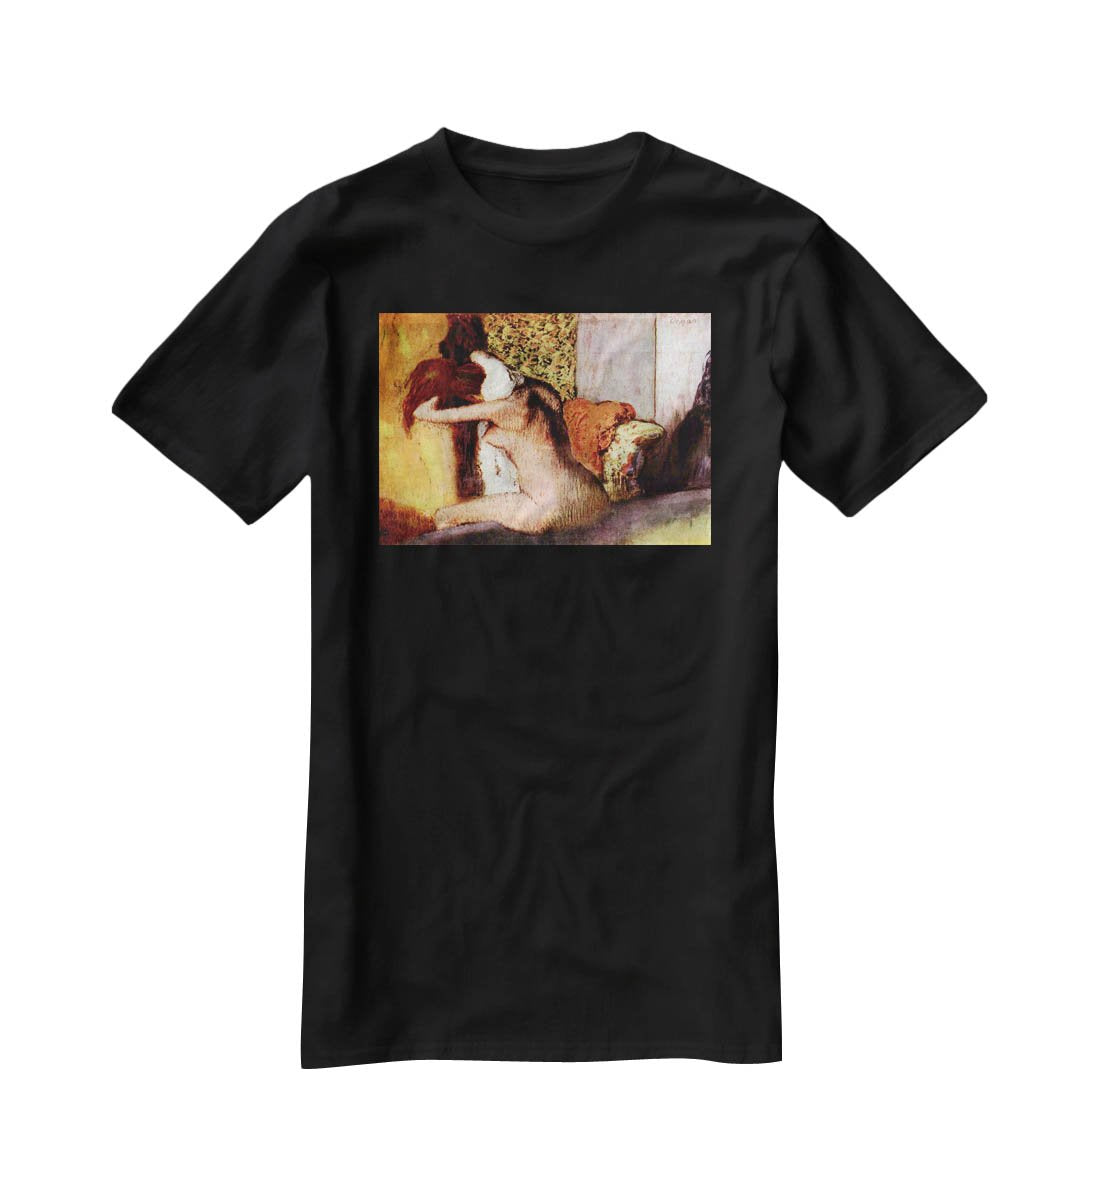 After bathing 2 by Degas T-Shirt - Canvas Art Rocks - 1